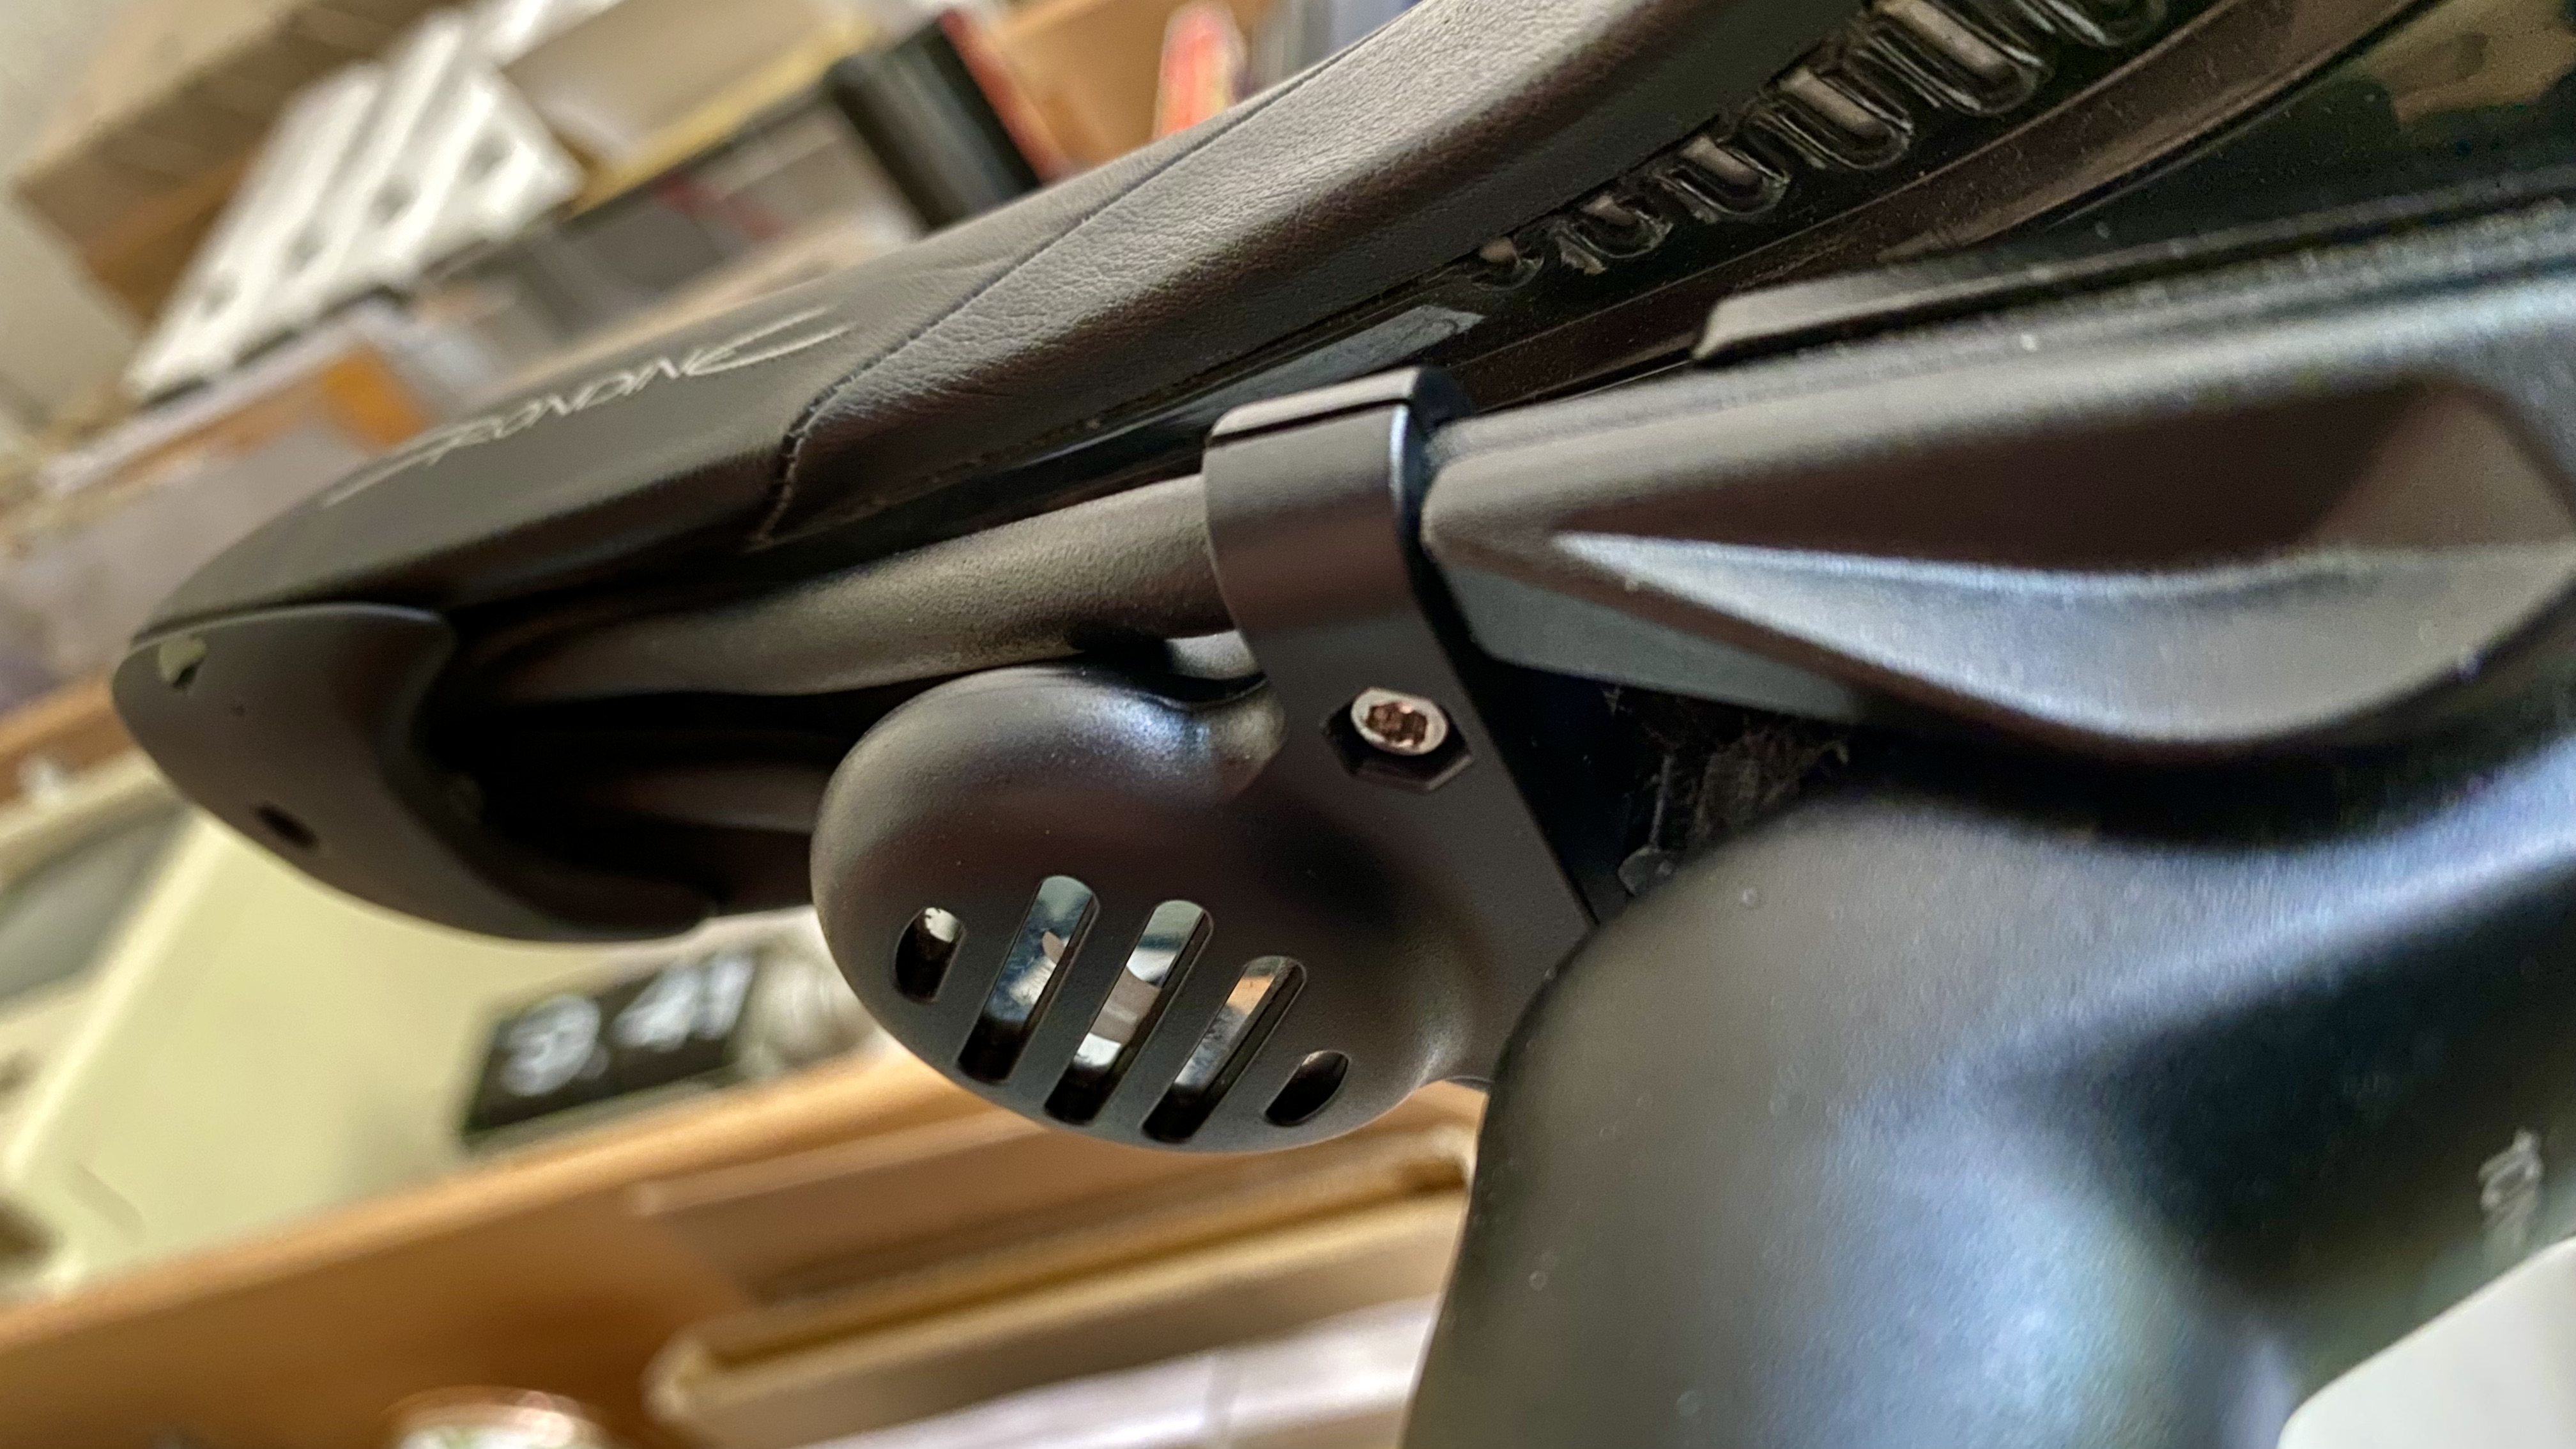 Closeup of the Saddle Mount fitted under my saddle viewed from below